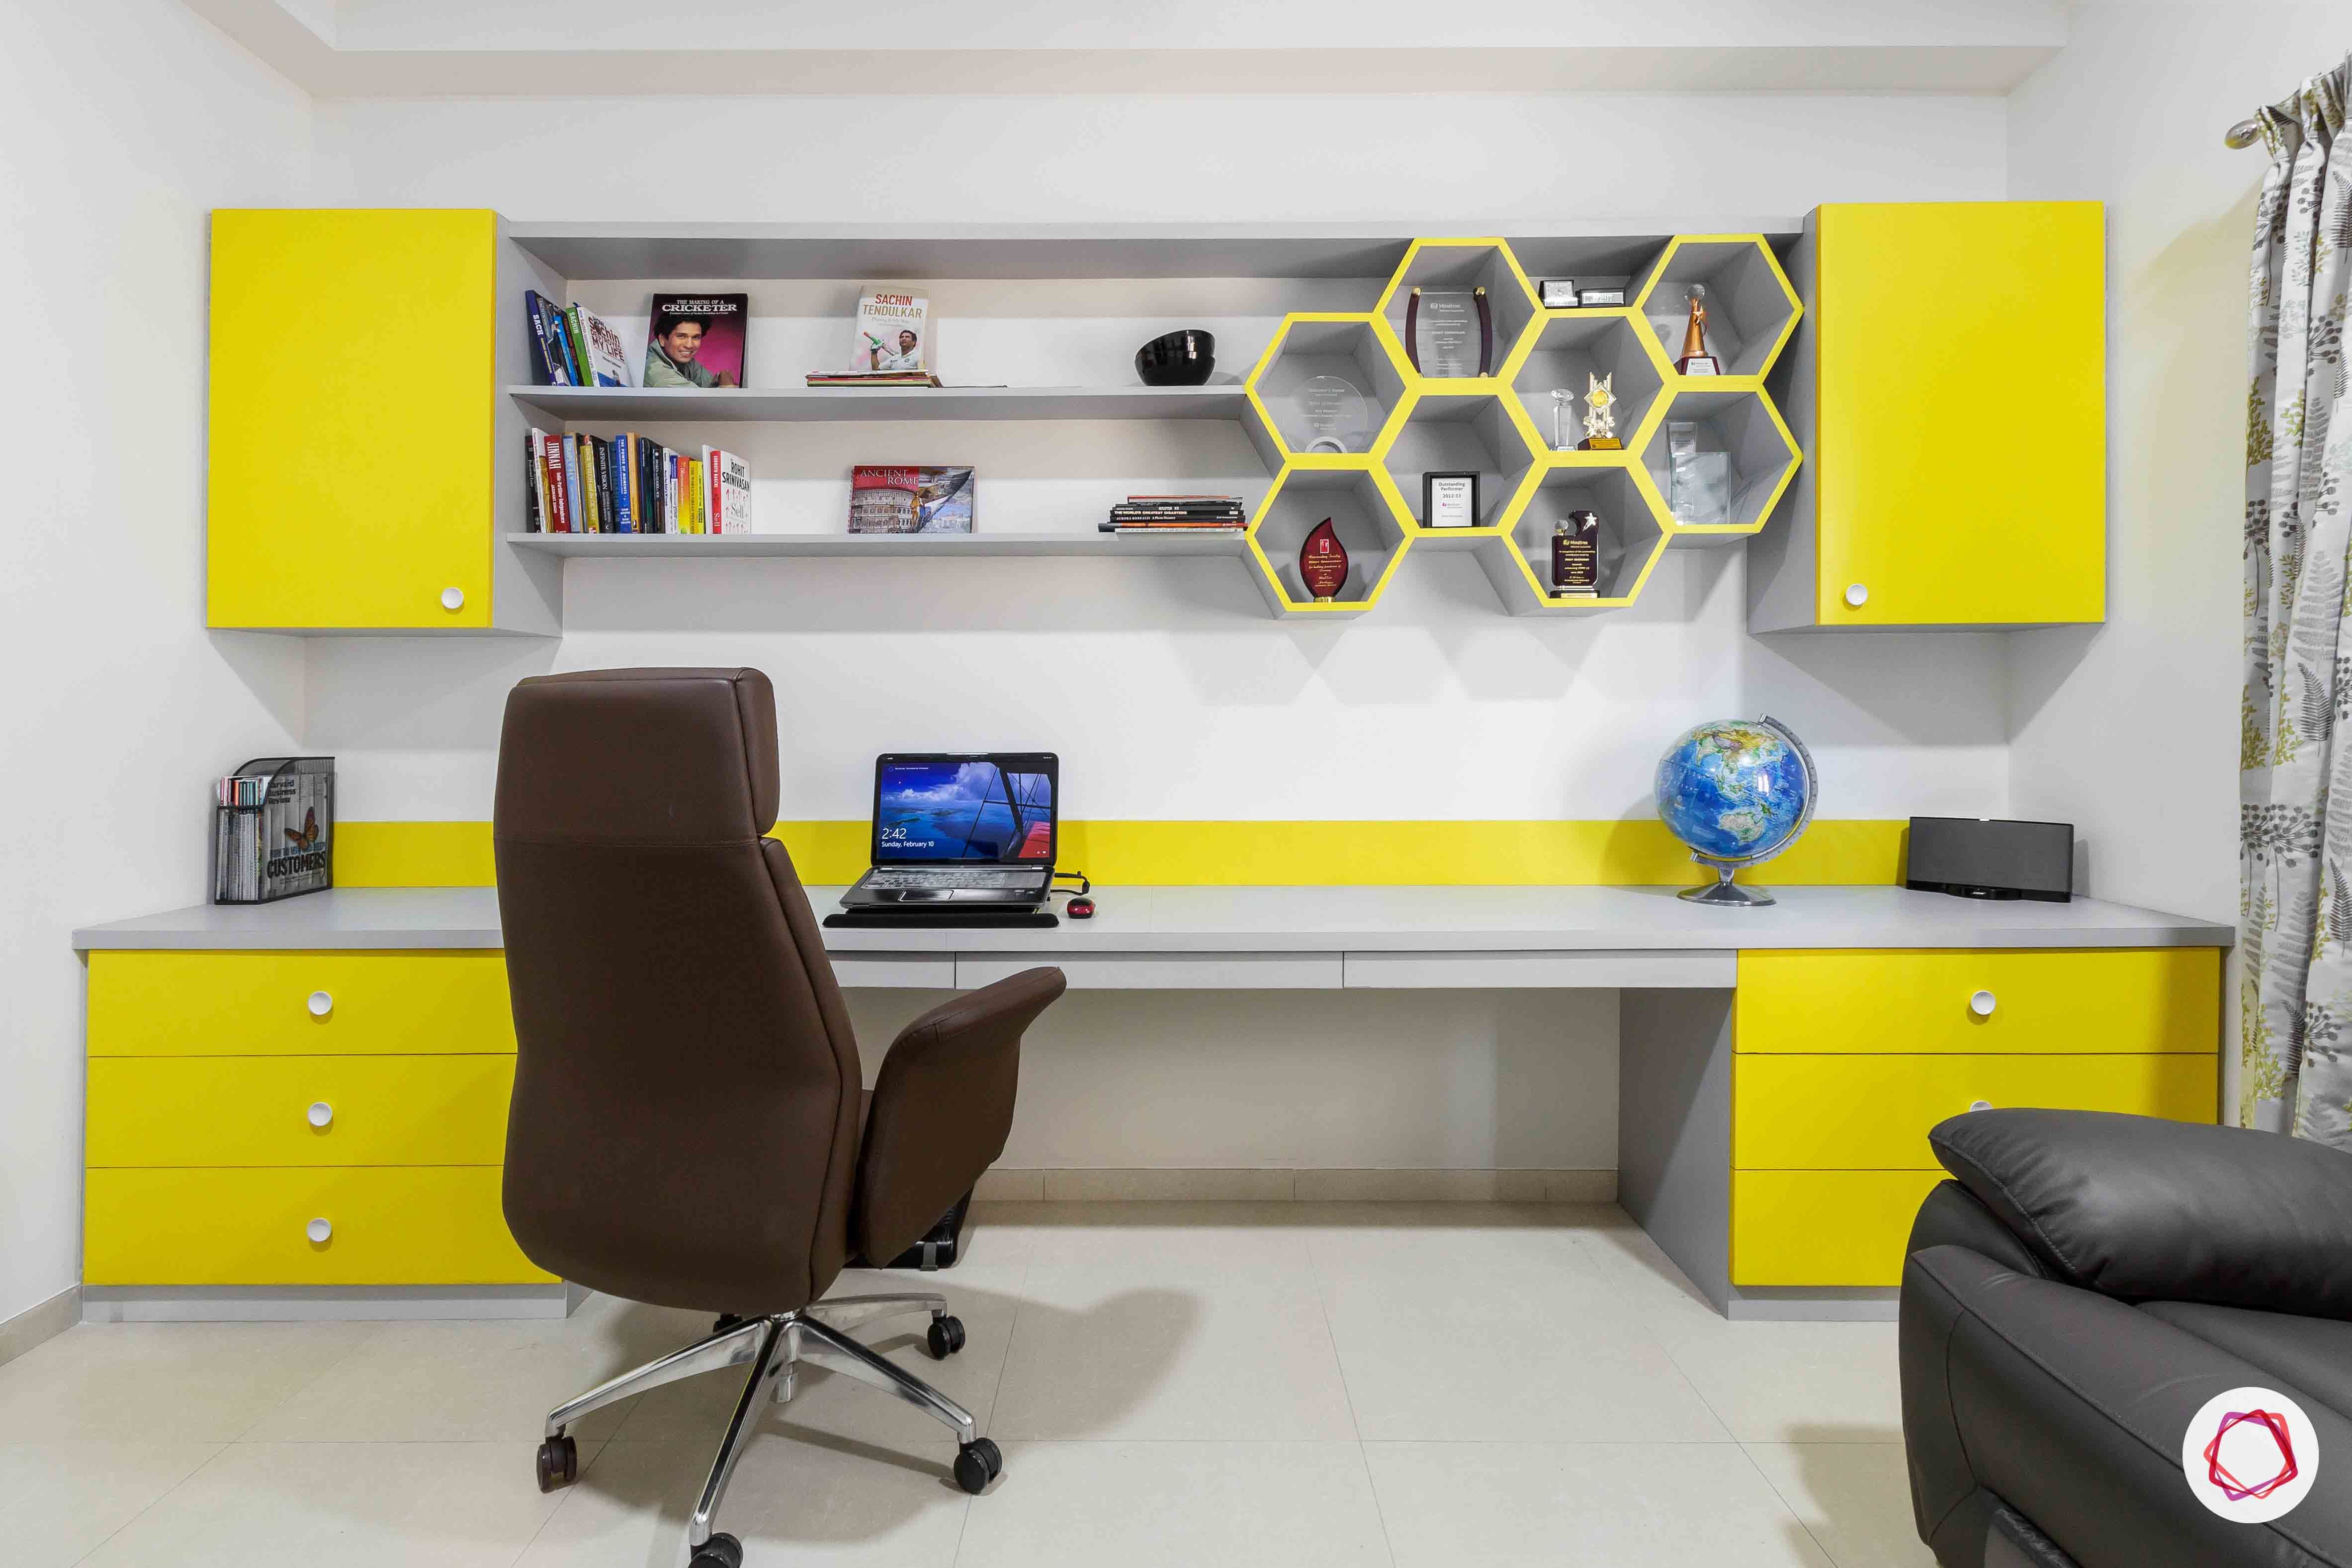 sobha forest view-study room-big study table-wall cabinets-yellow colour shelves